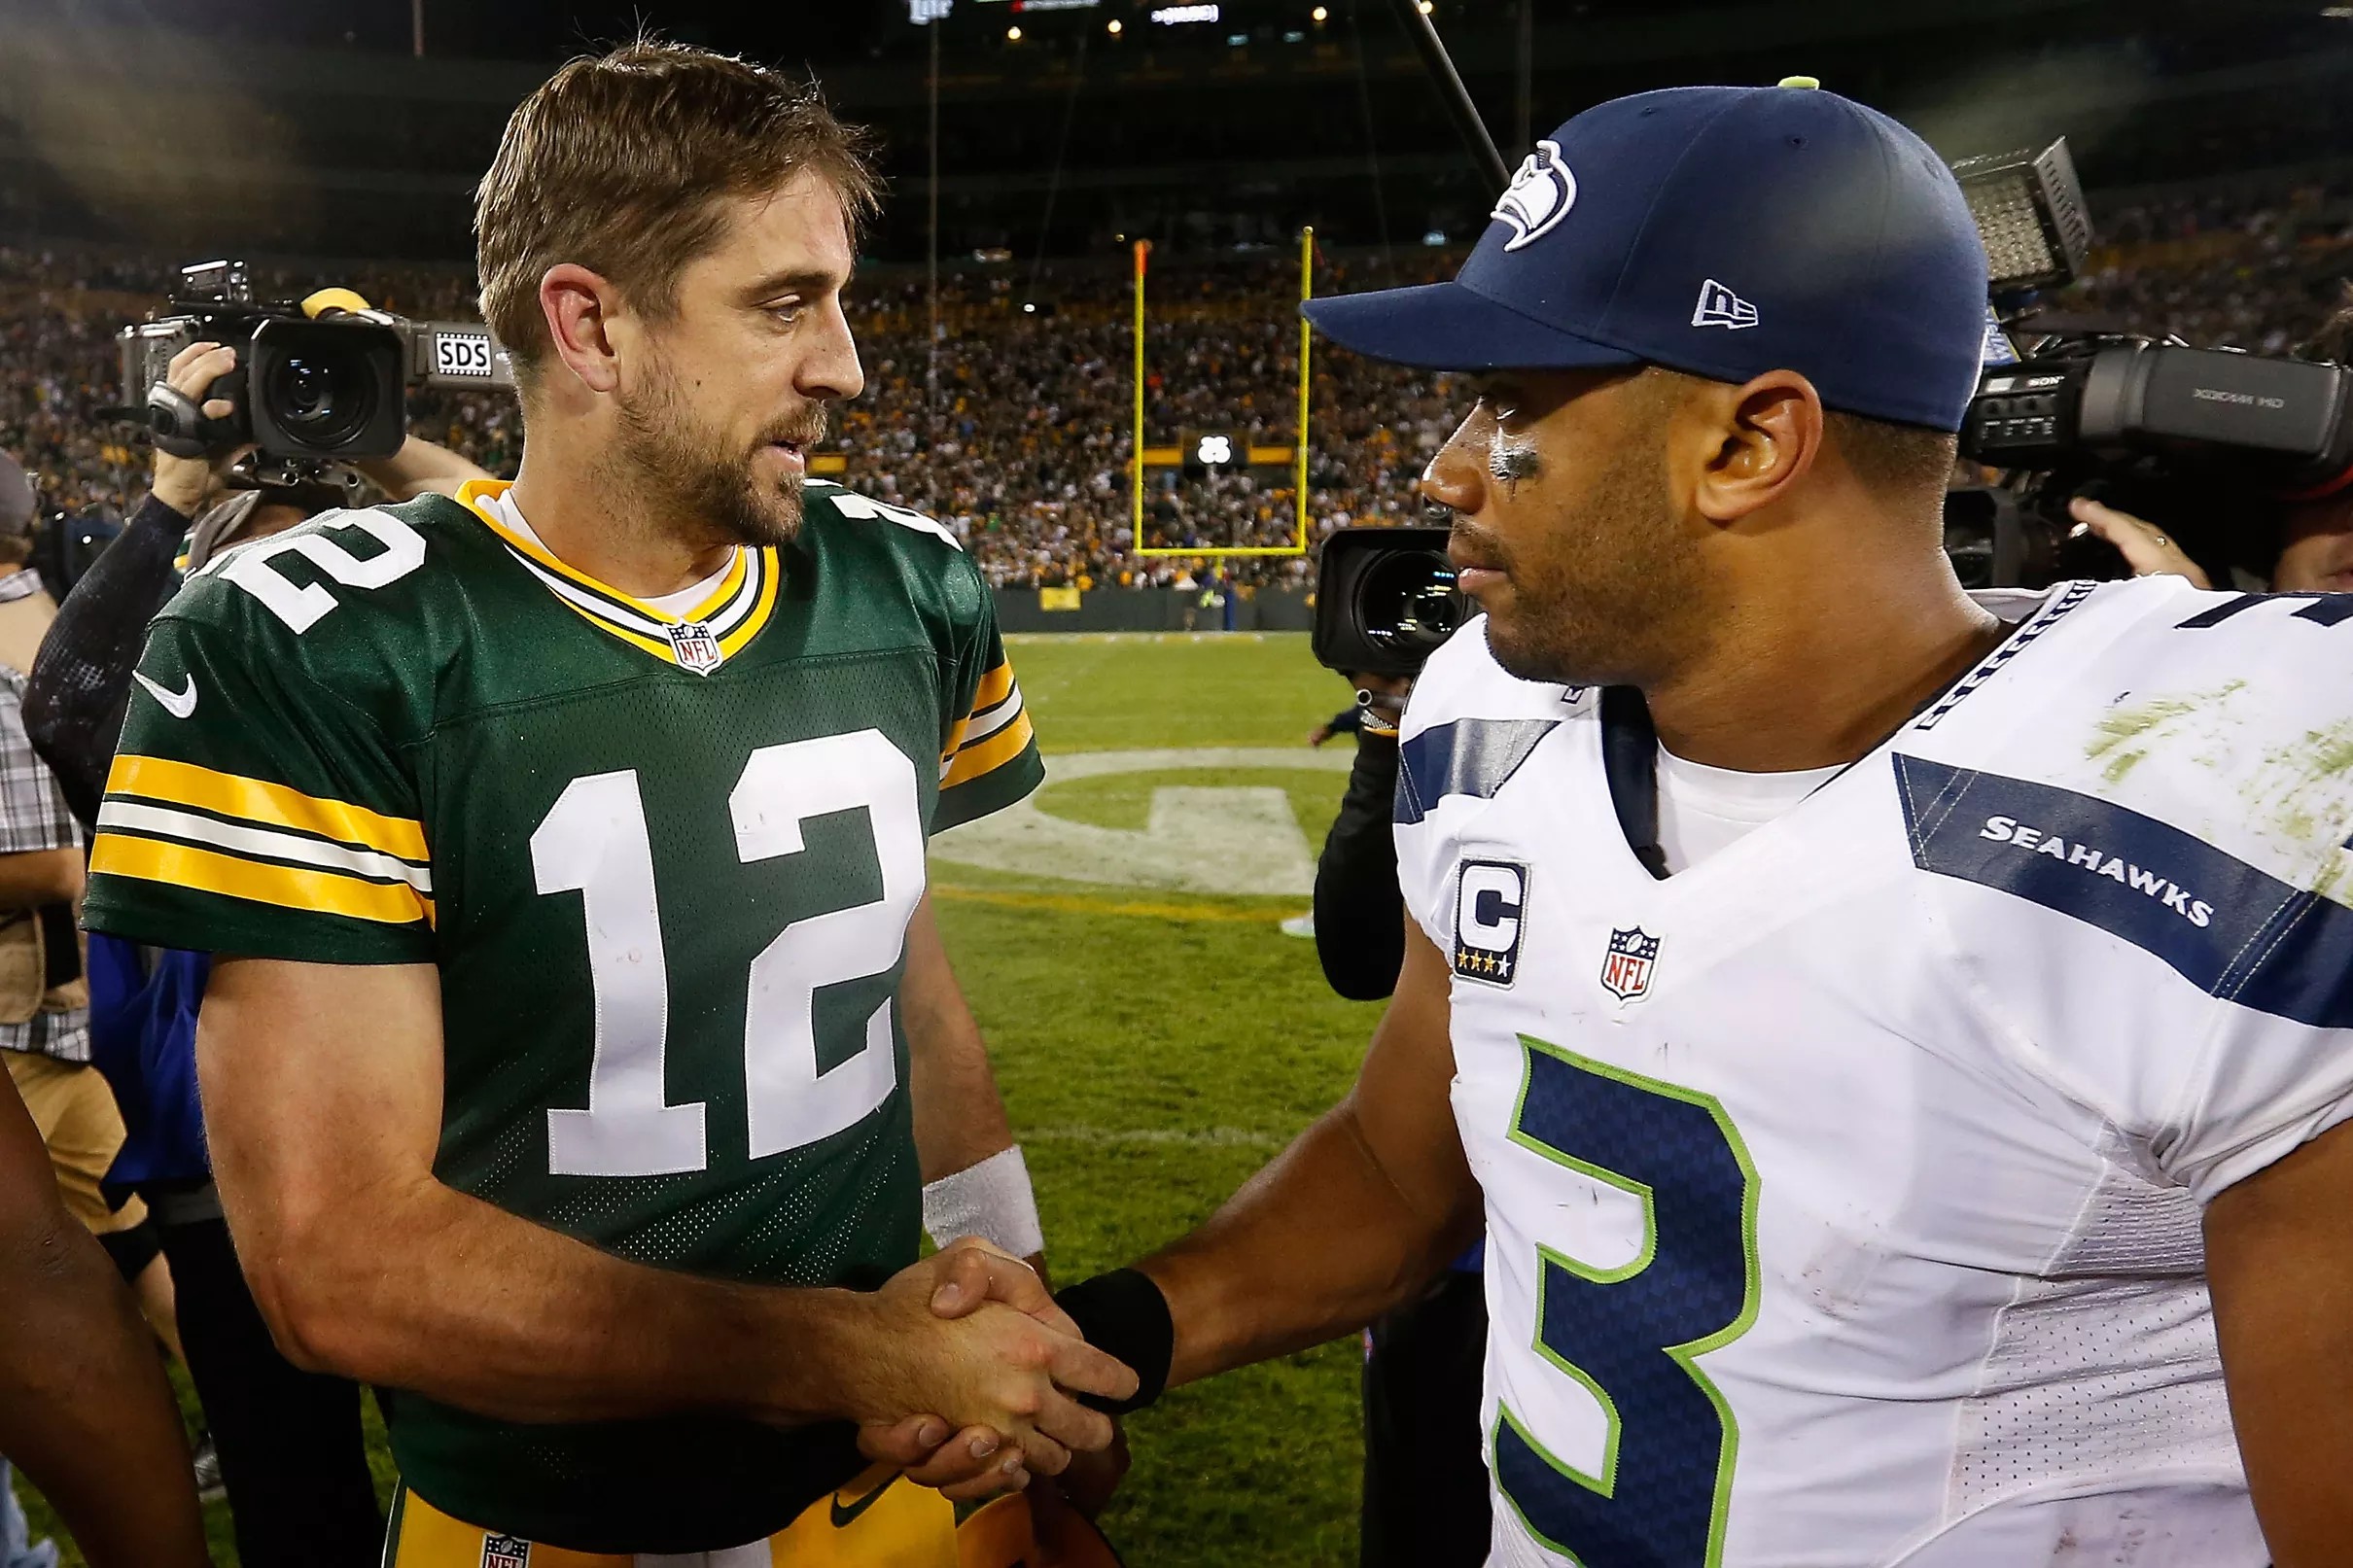 Why Russell Wilson is better than any other QB, the finale The top 5